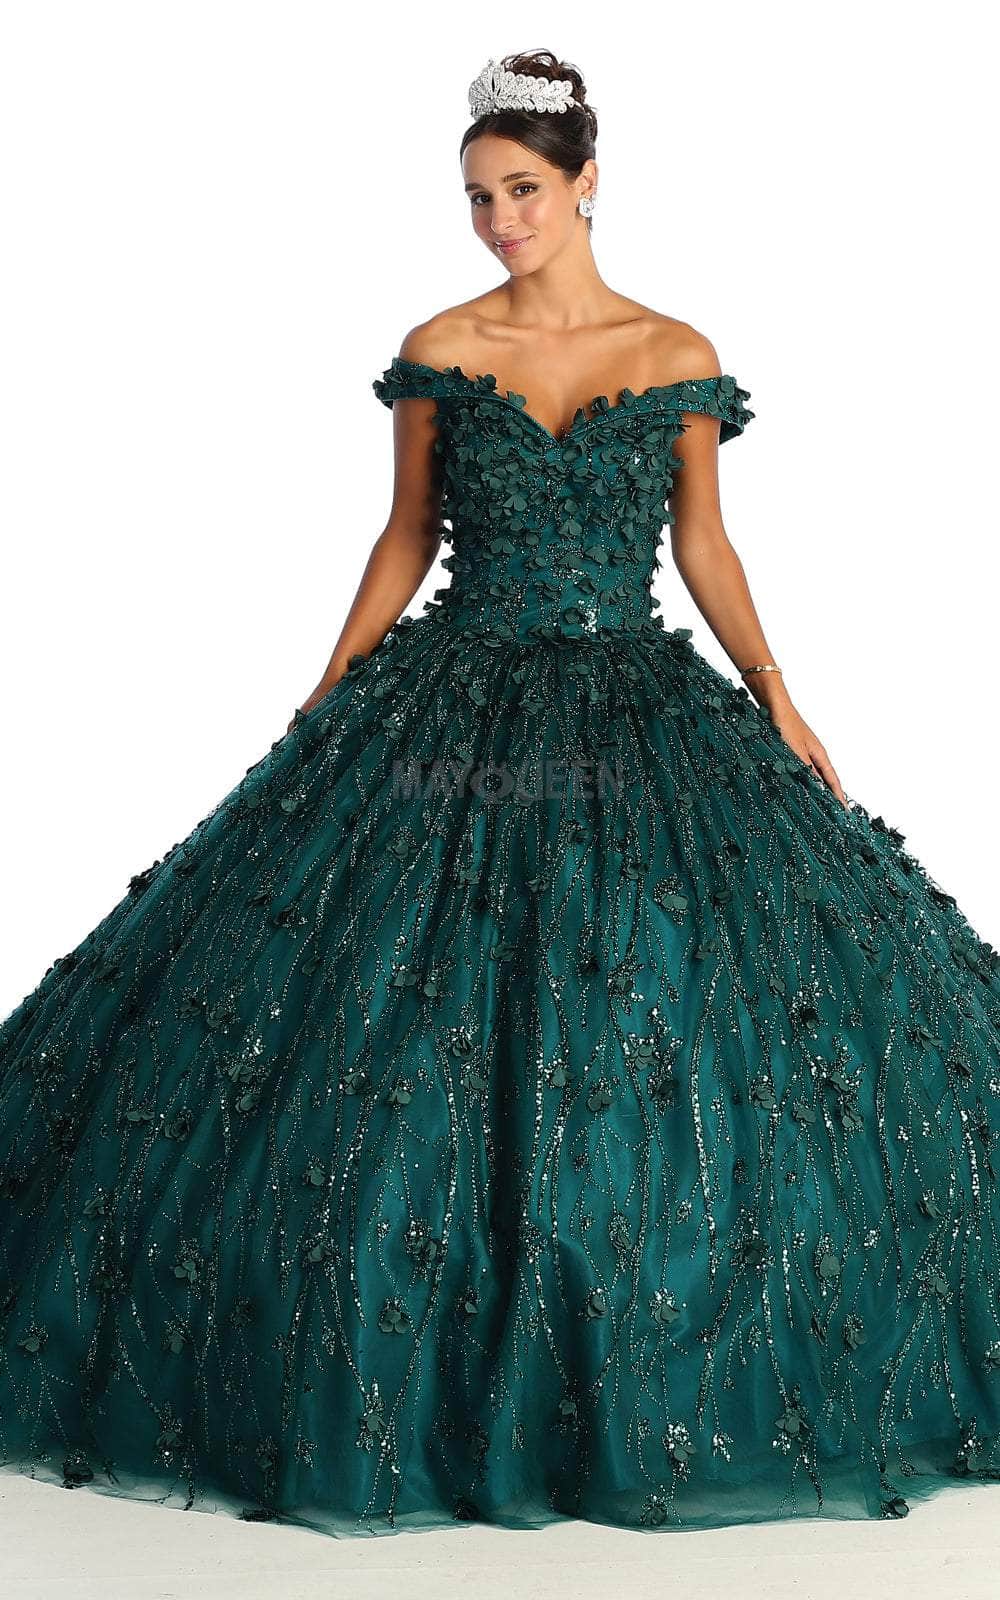 May Queen LK167 - Leaf Applique A Line Gown Ball Gowns